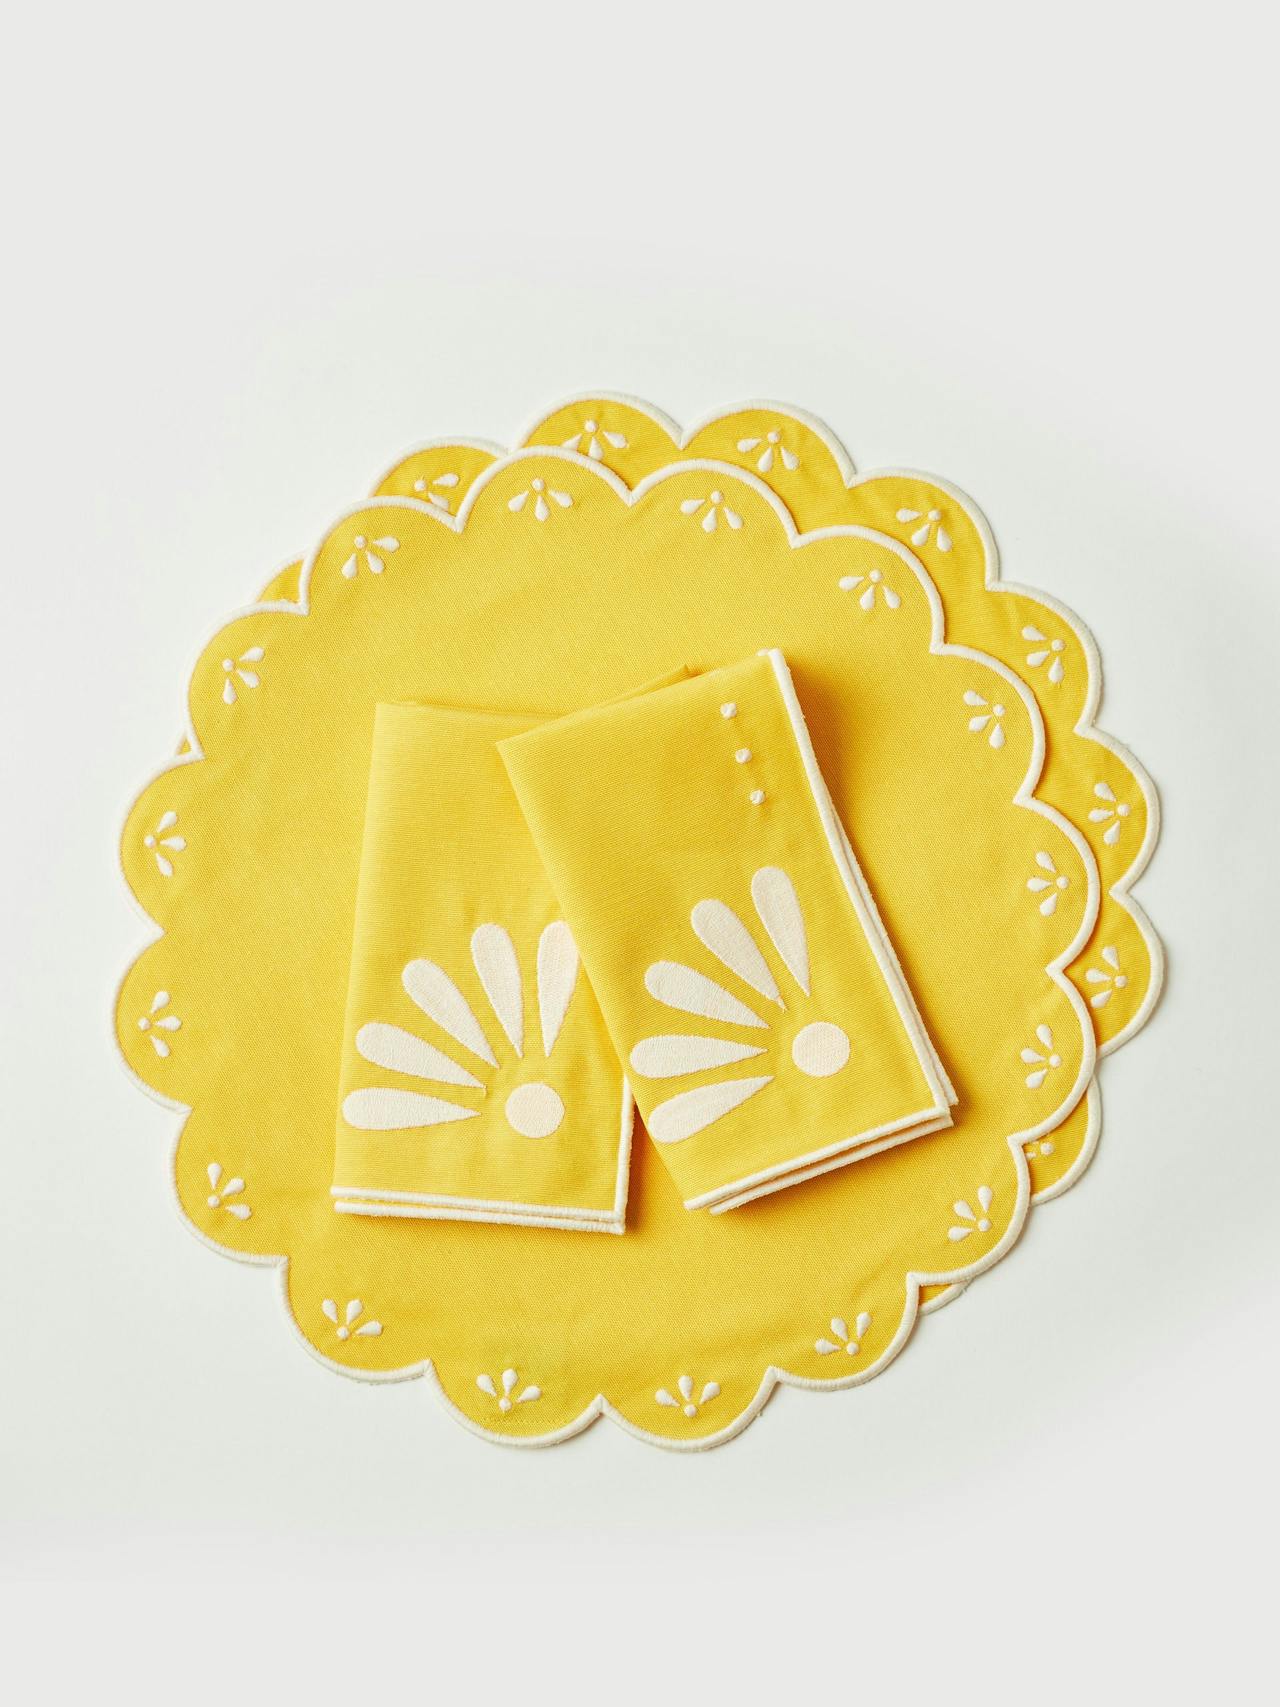 Peony yellow placemats and napkins, set of 2